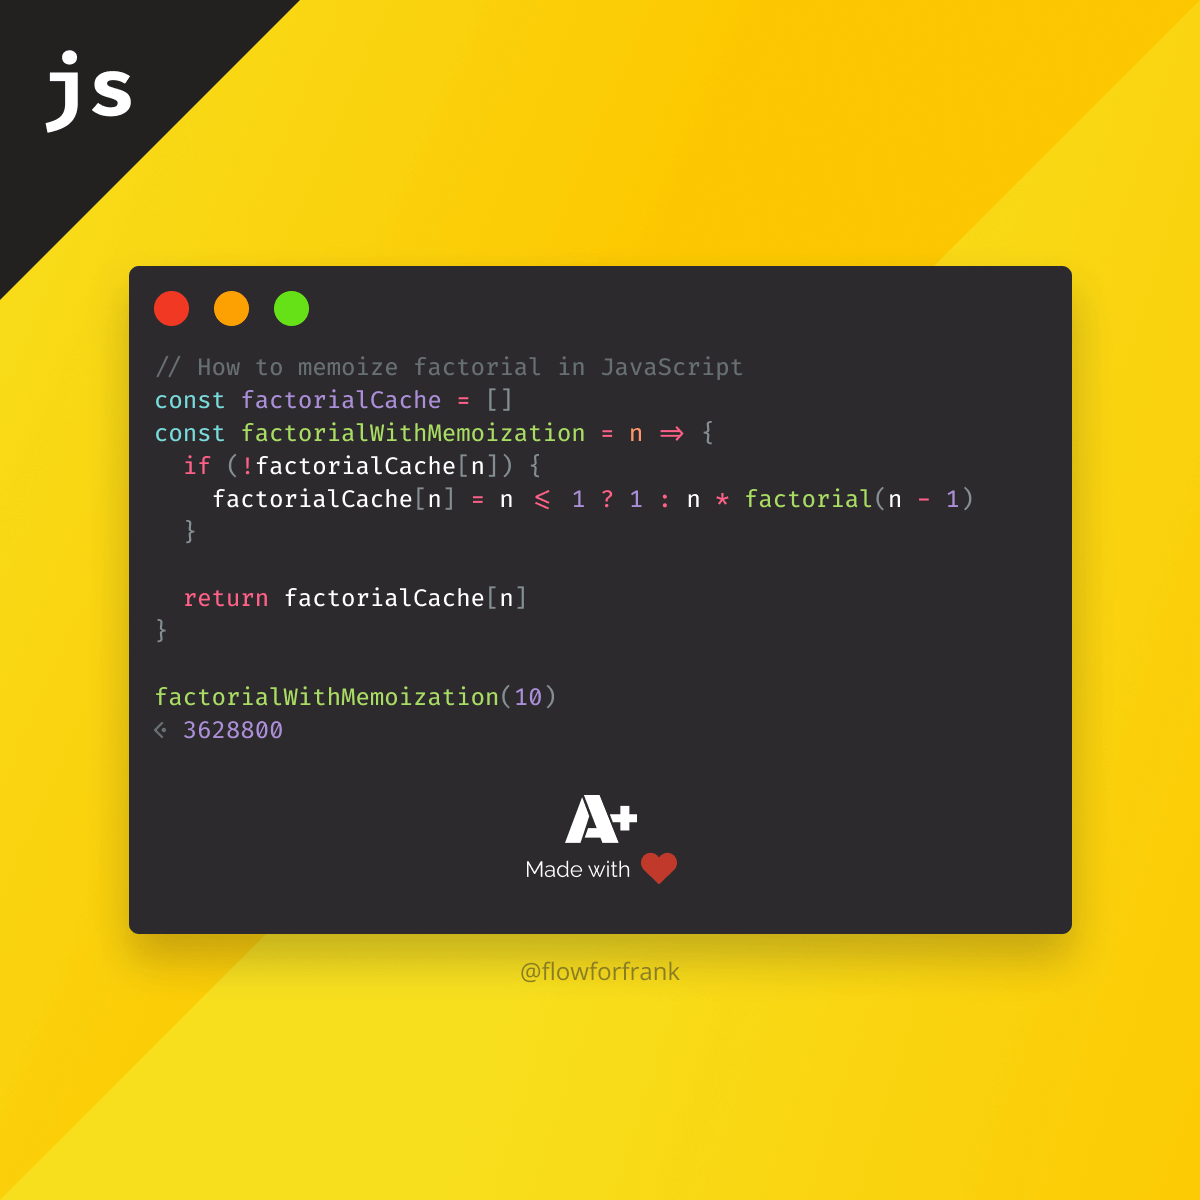 How to Do Factorial with Memoization in JavaScript